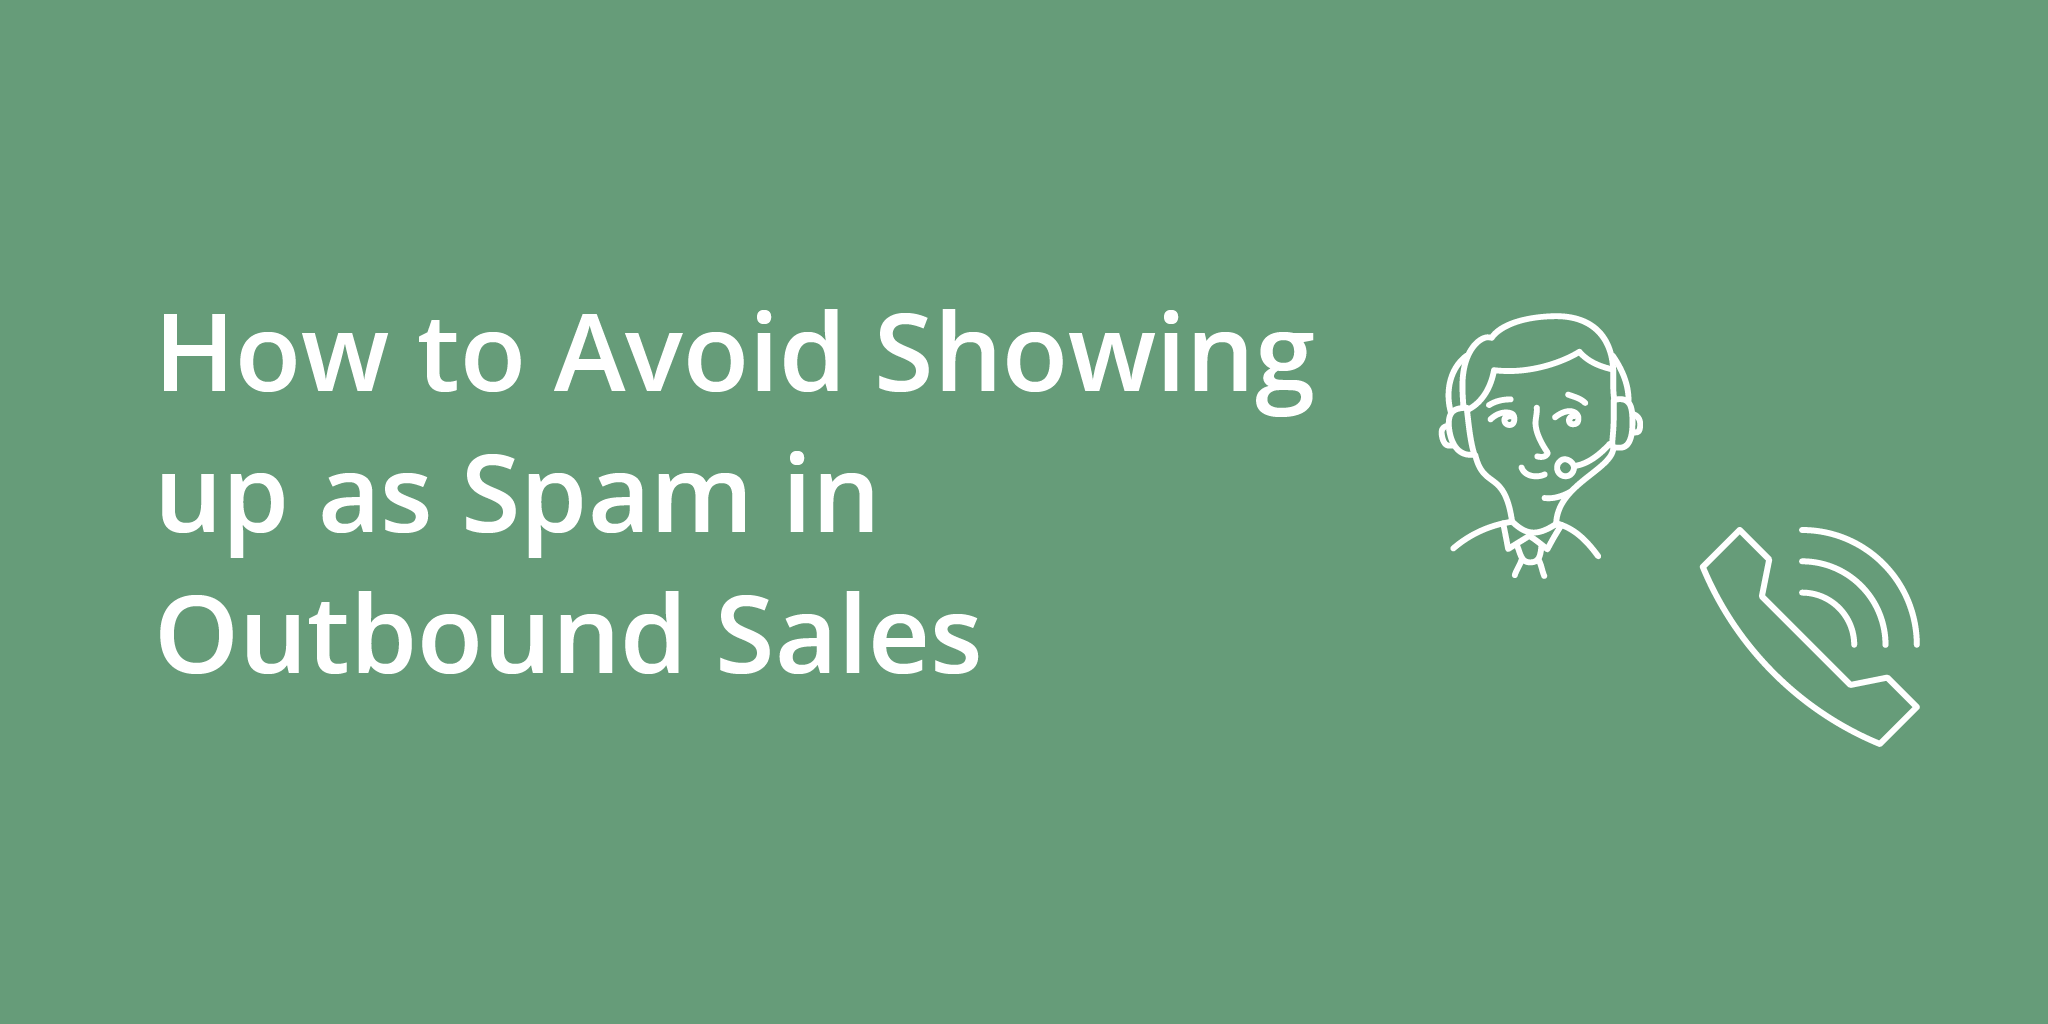 How to Avoid Showing up as Scam Likely in Outbound Sales | Telephones for business